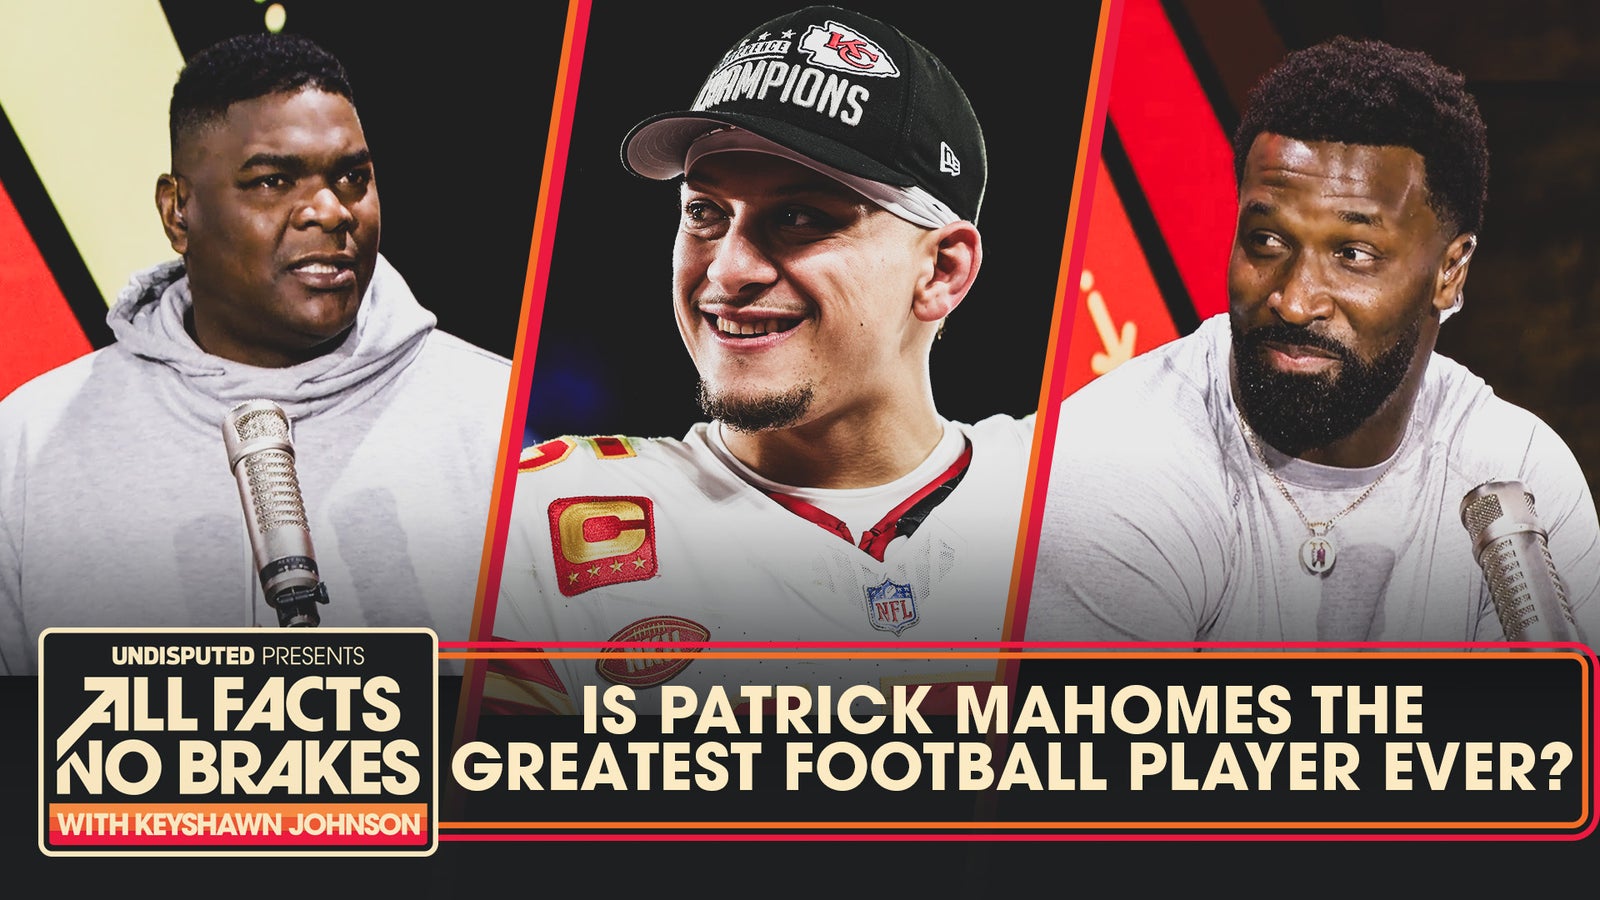 Patrick Mahomes the greatest football player of all-time?